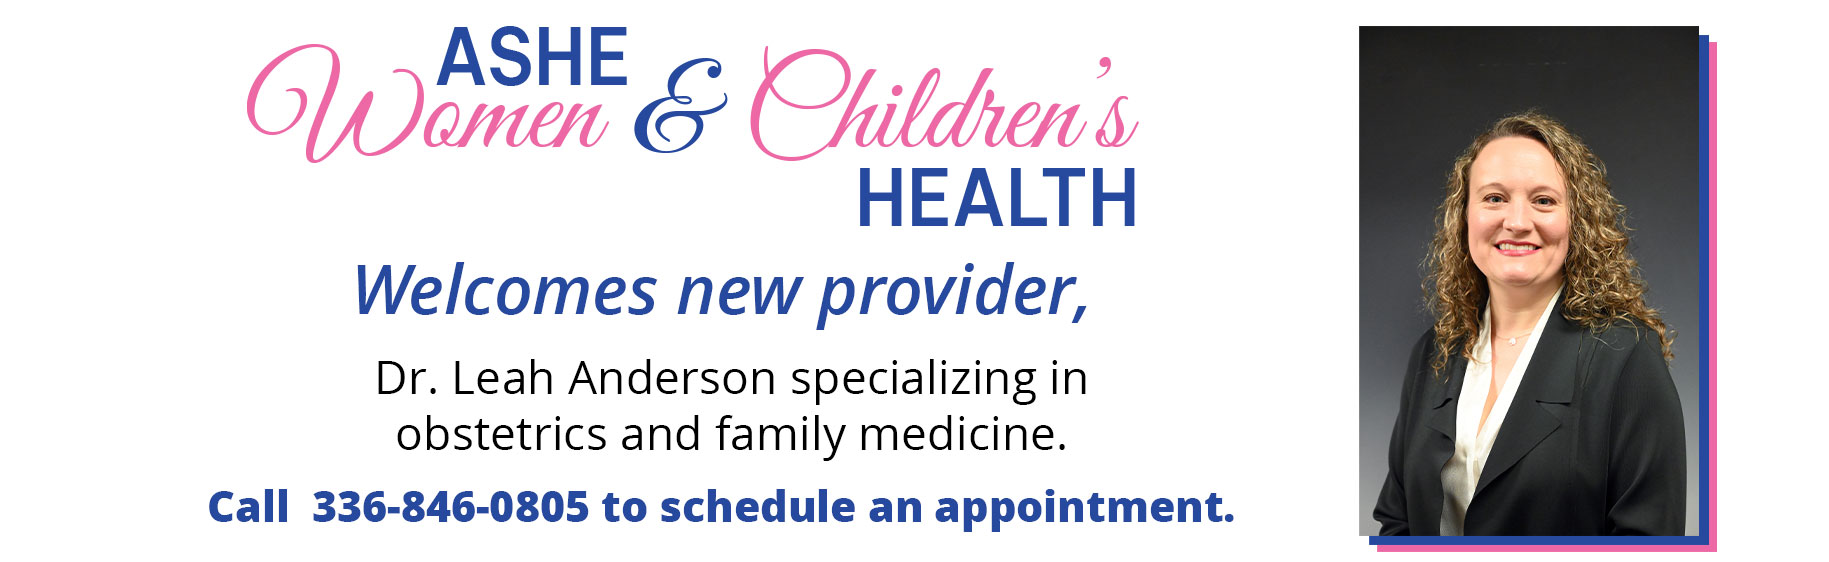 Ashe Women & Children's Health

Welcomes new provider, Dr. Leah Anderson specializing in obstetrics and family medicine. 

Call 336-846-0805 to schedule an appointment.